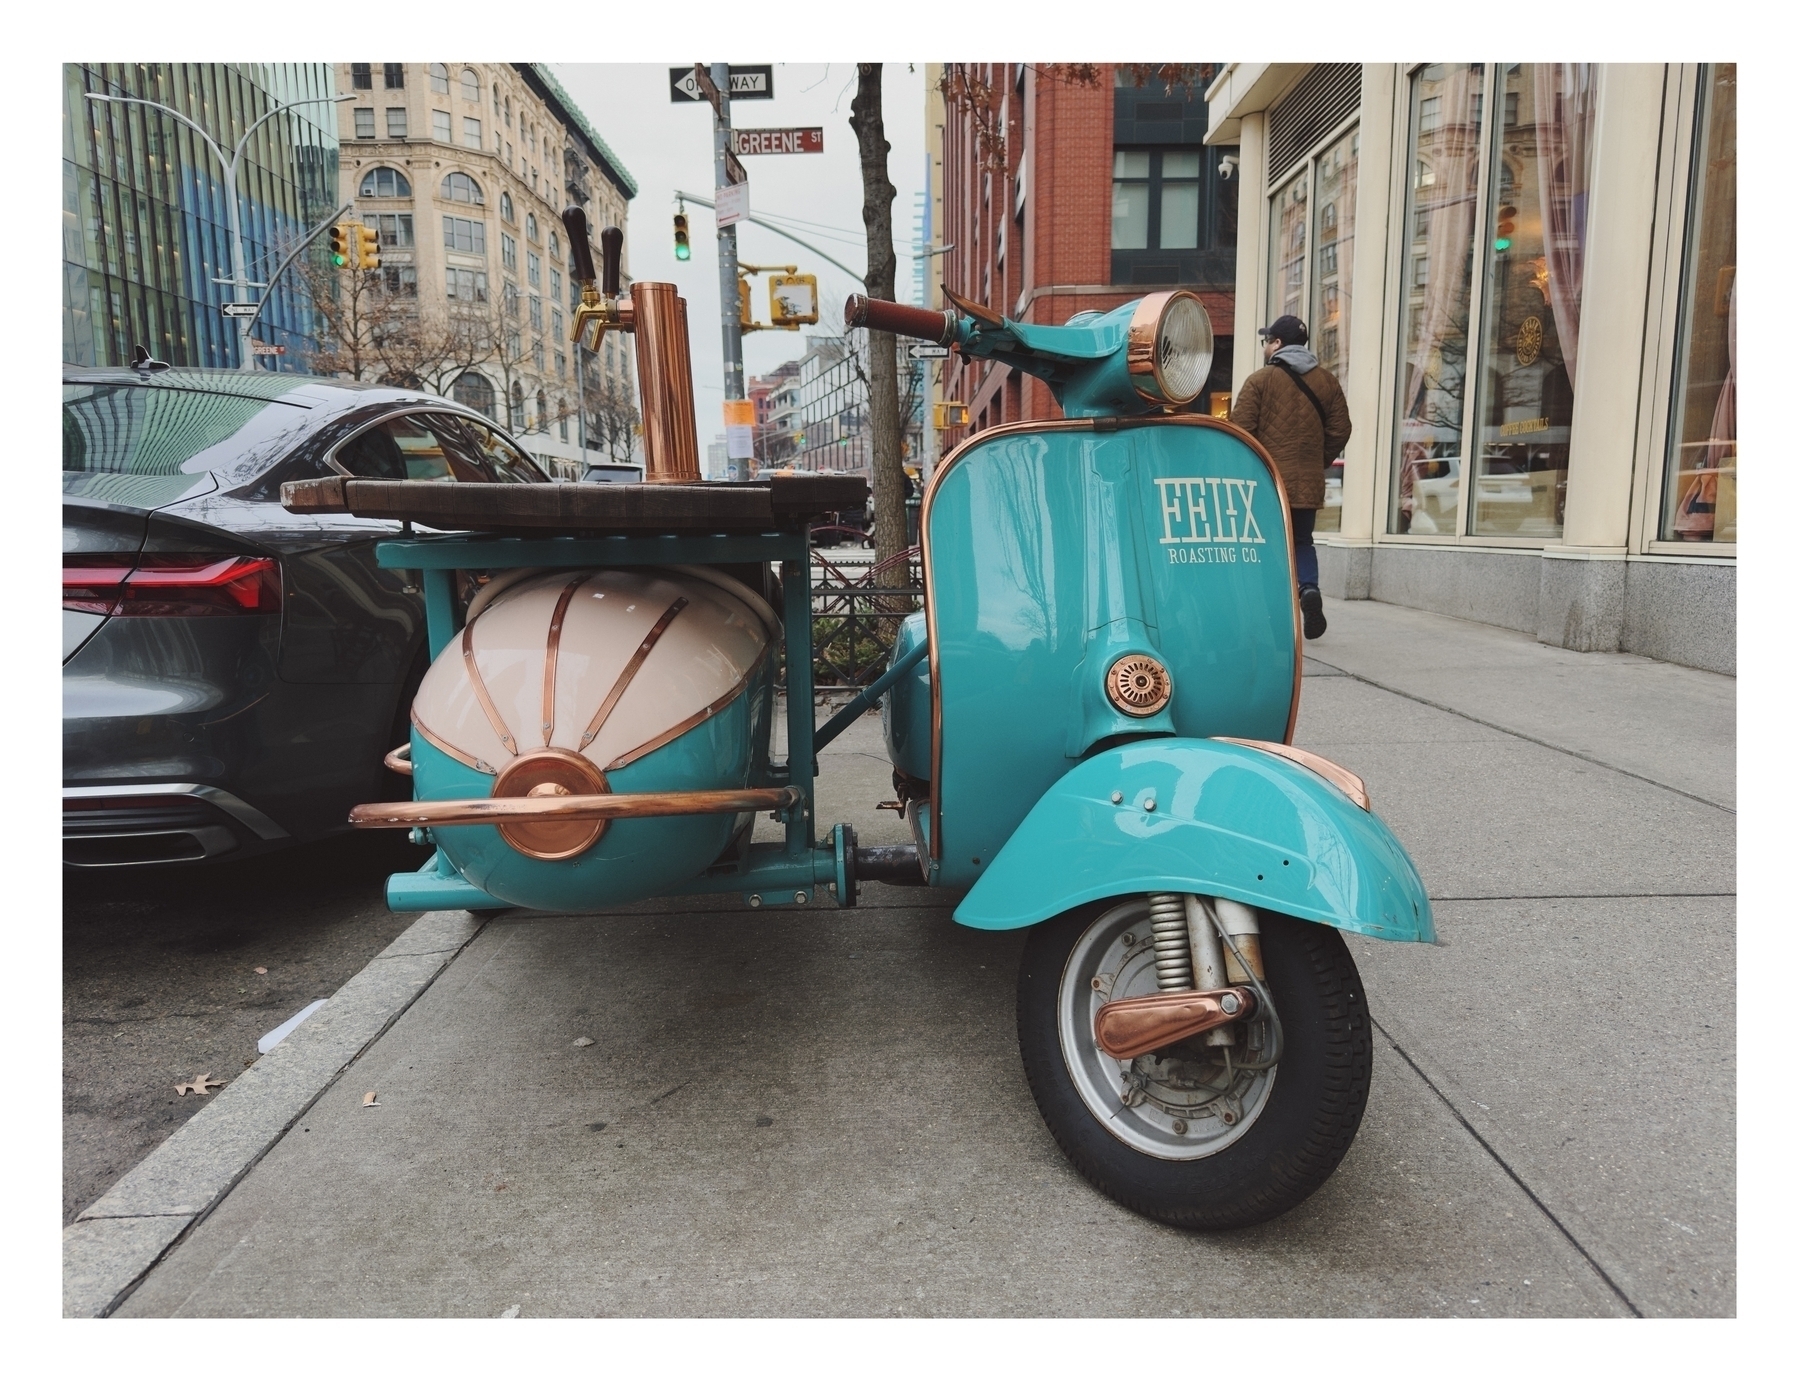 A turquoise scooter with a sidecar, both outfitted with coffee-making equipment, parked on an urban street. Text on scooter: “FELIX ROASTING CO.